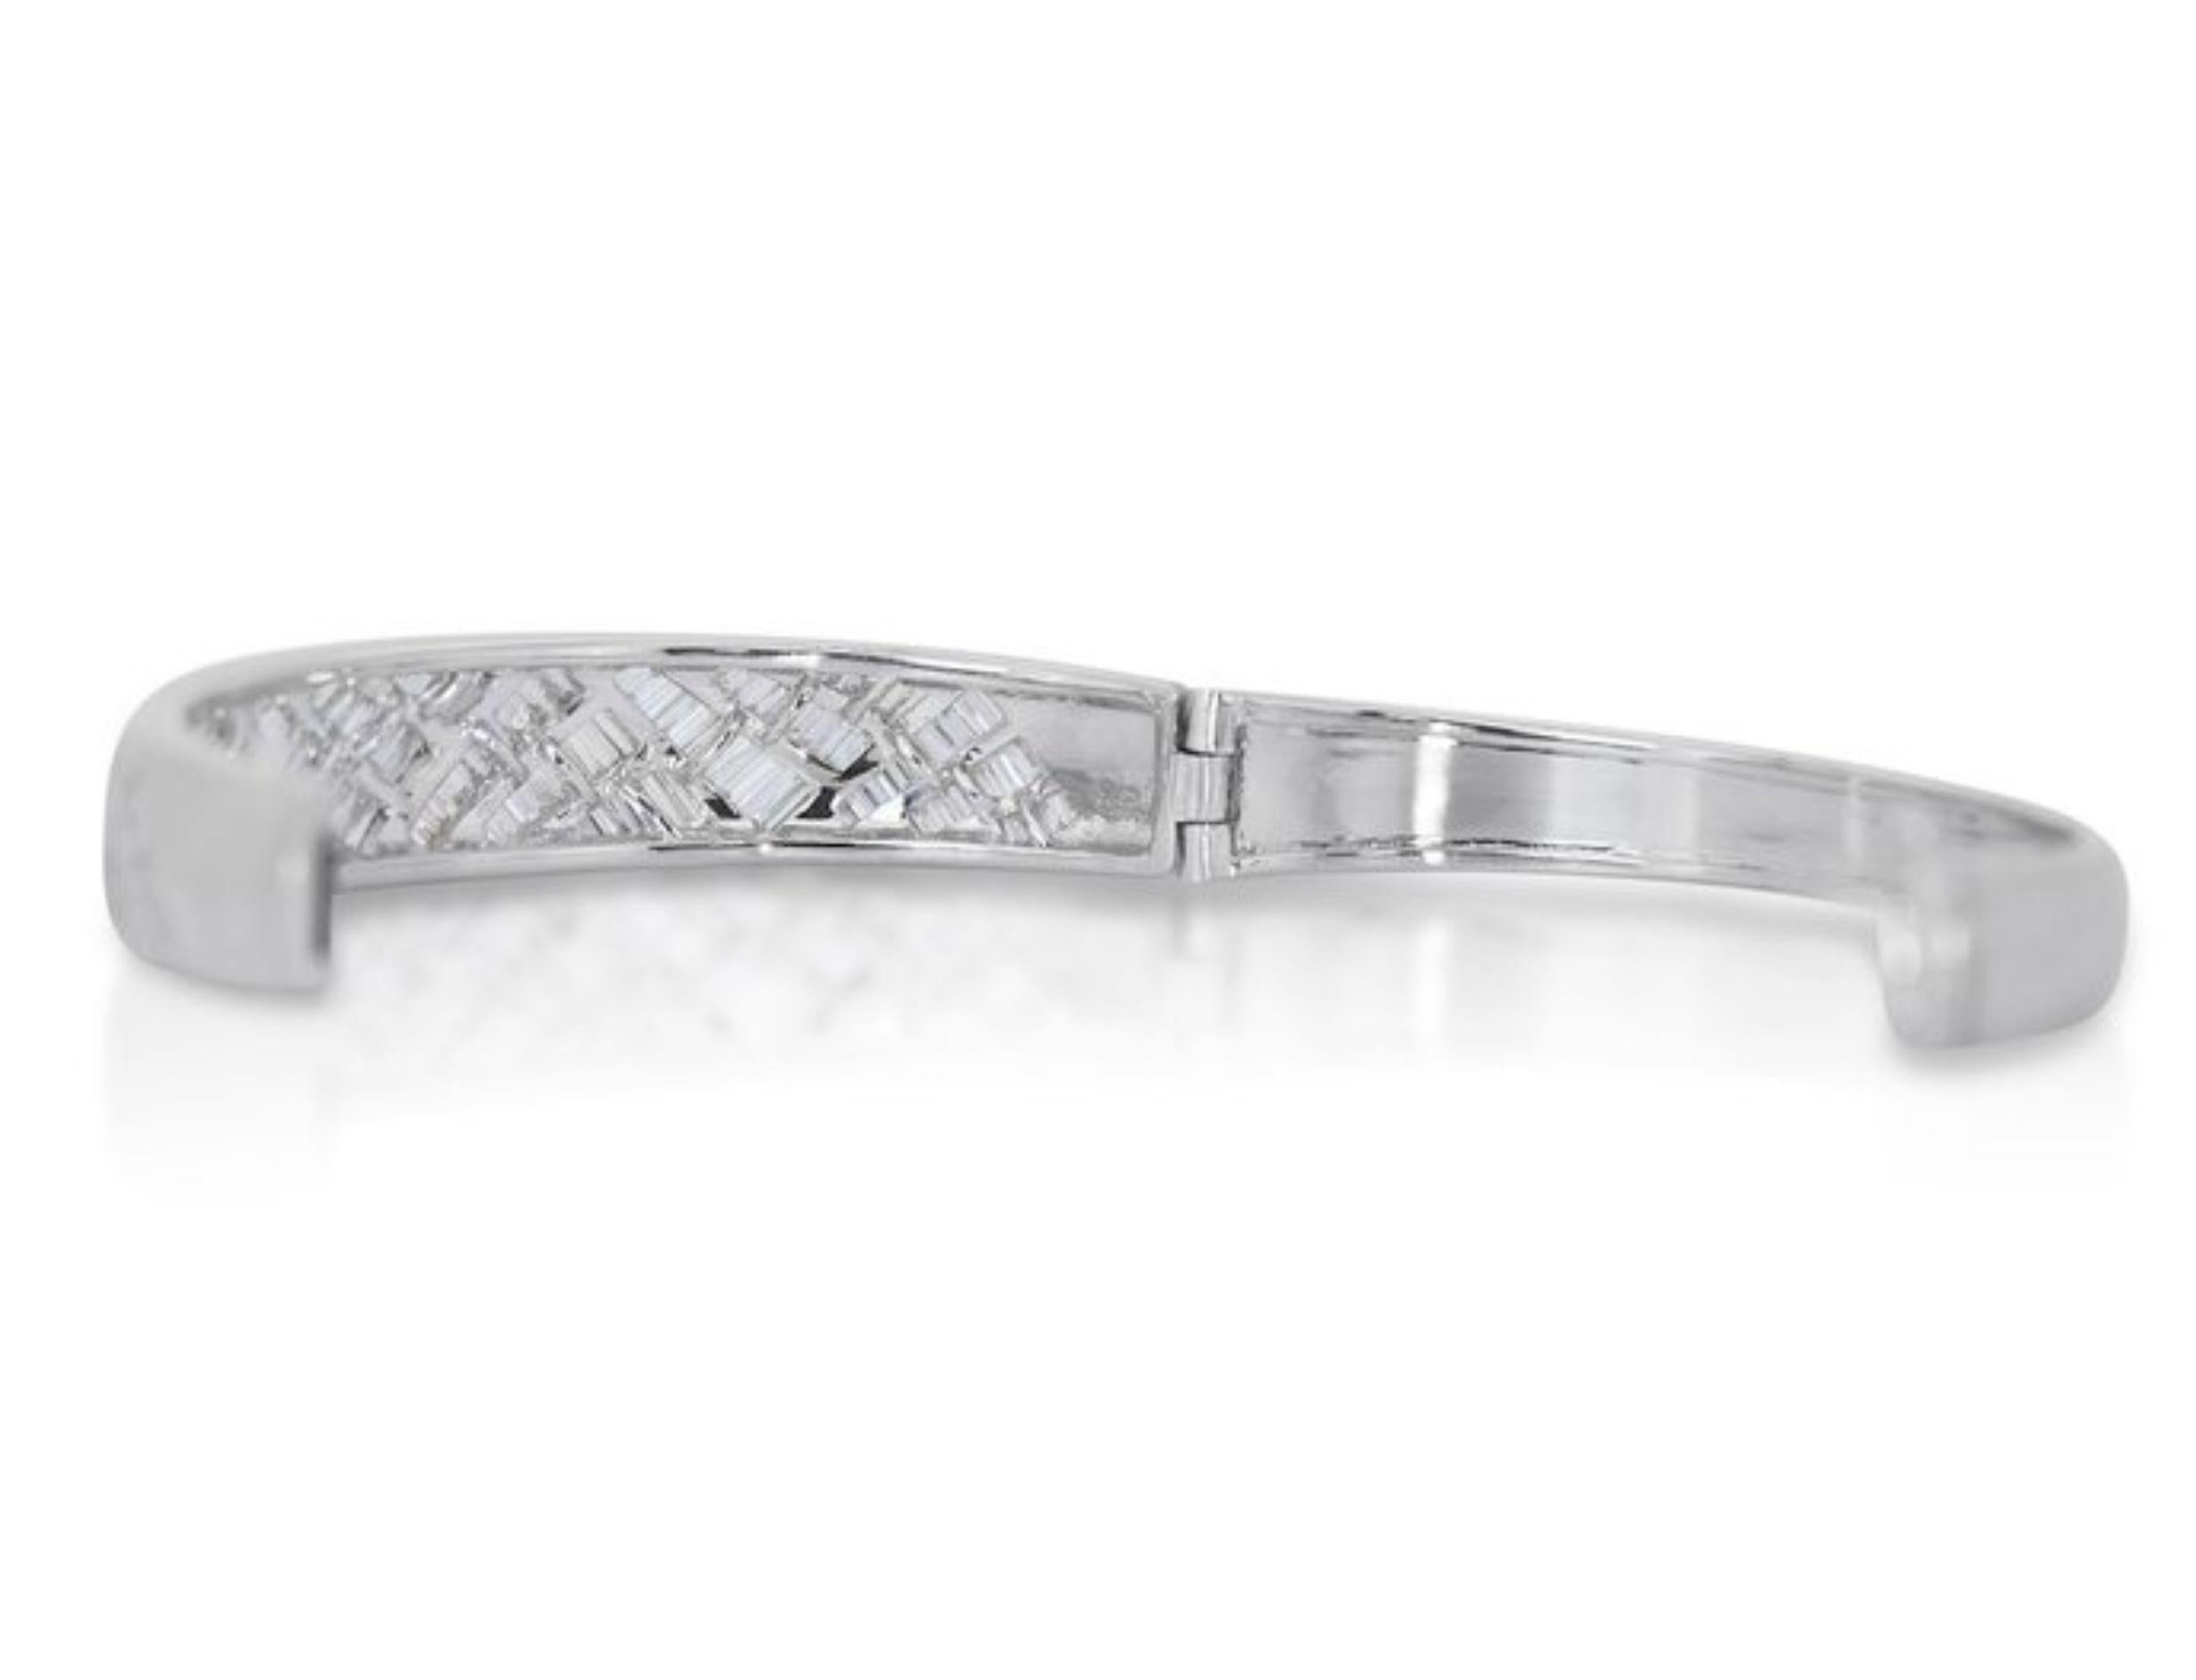 Sparkling 5.63ct Baguette Diamond Bracelet in 18K White Gold In New Condition For Sale In רמת גן, IL